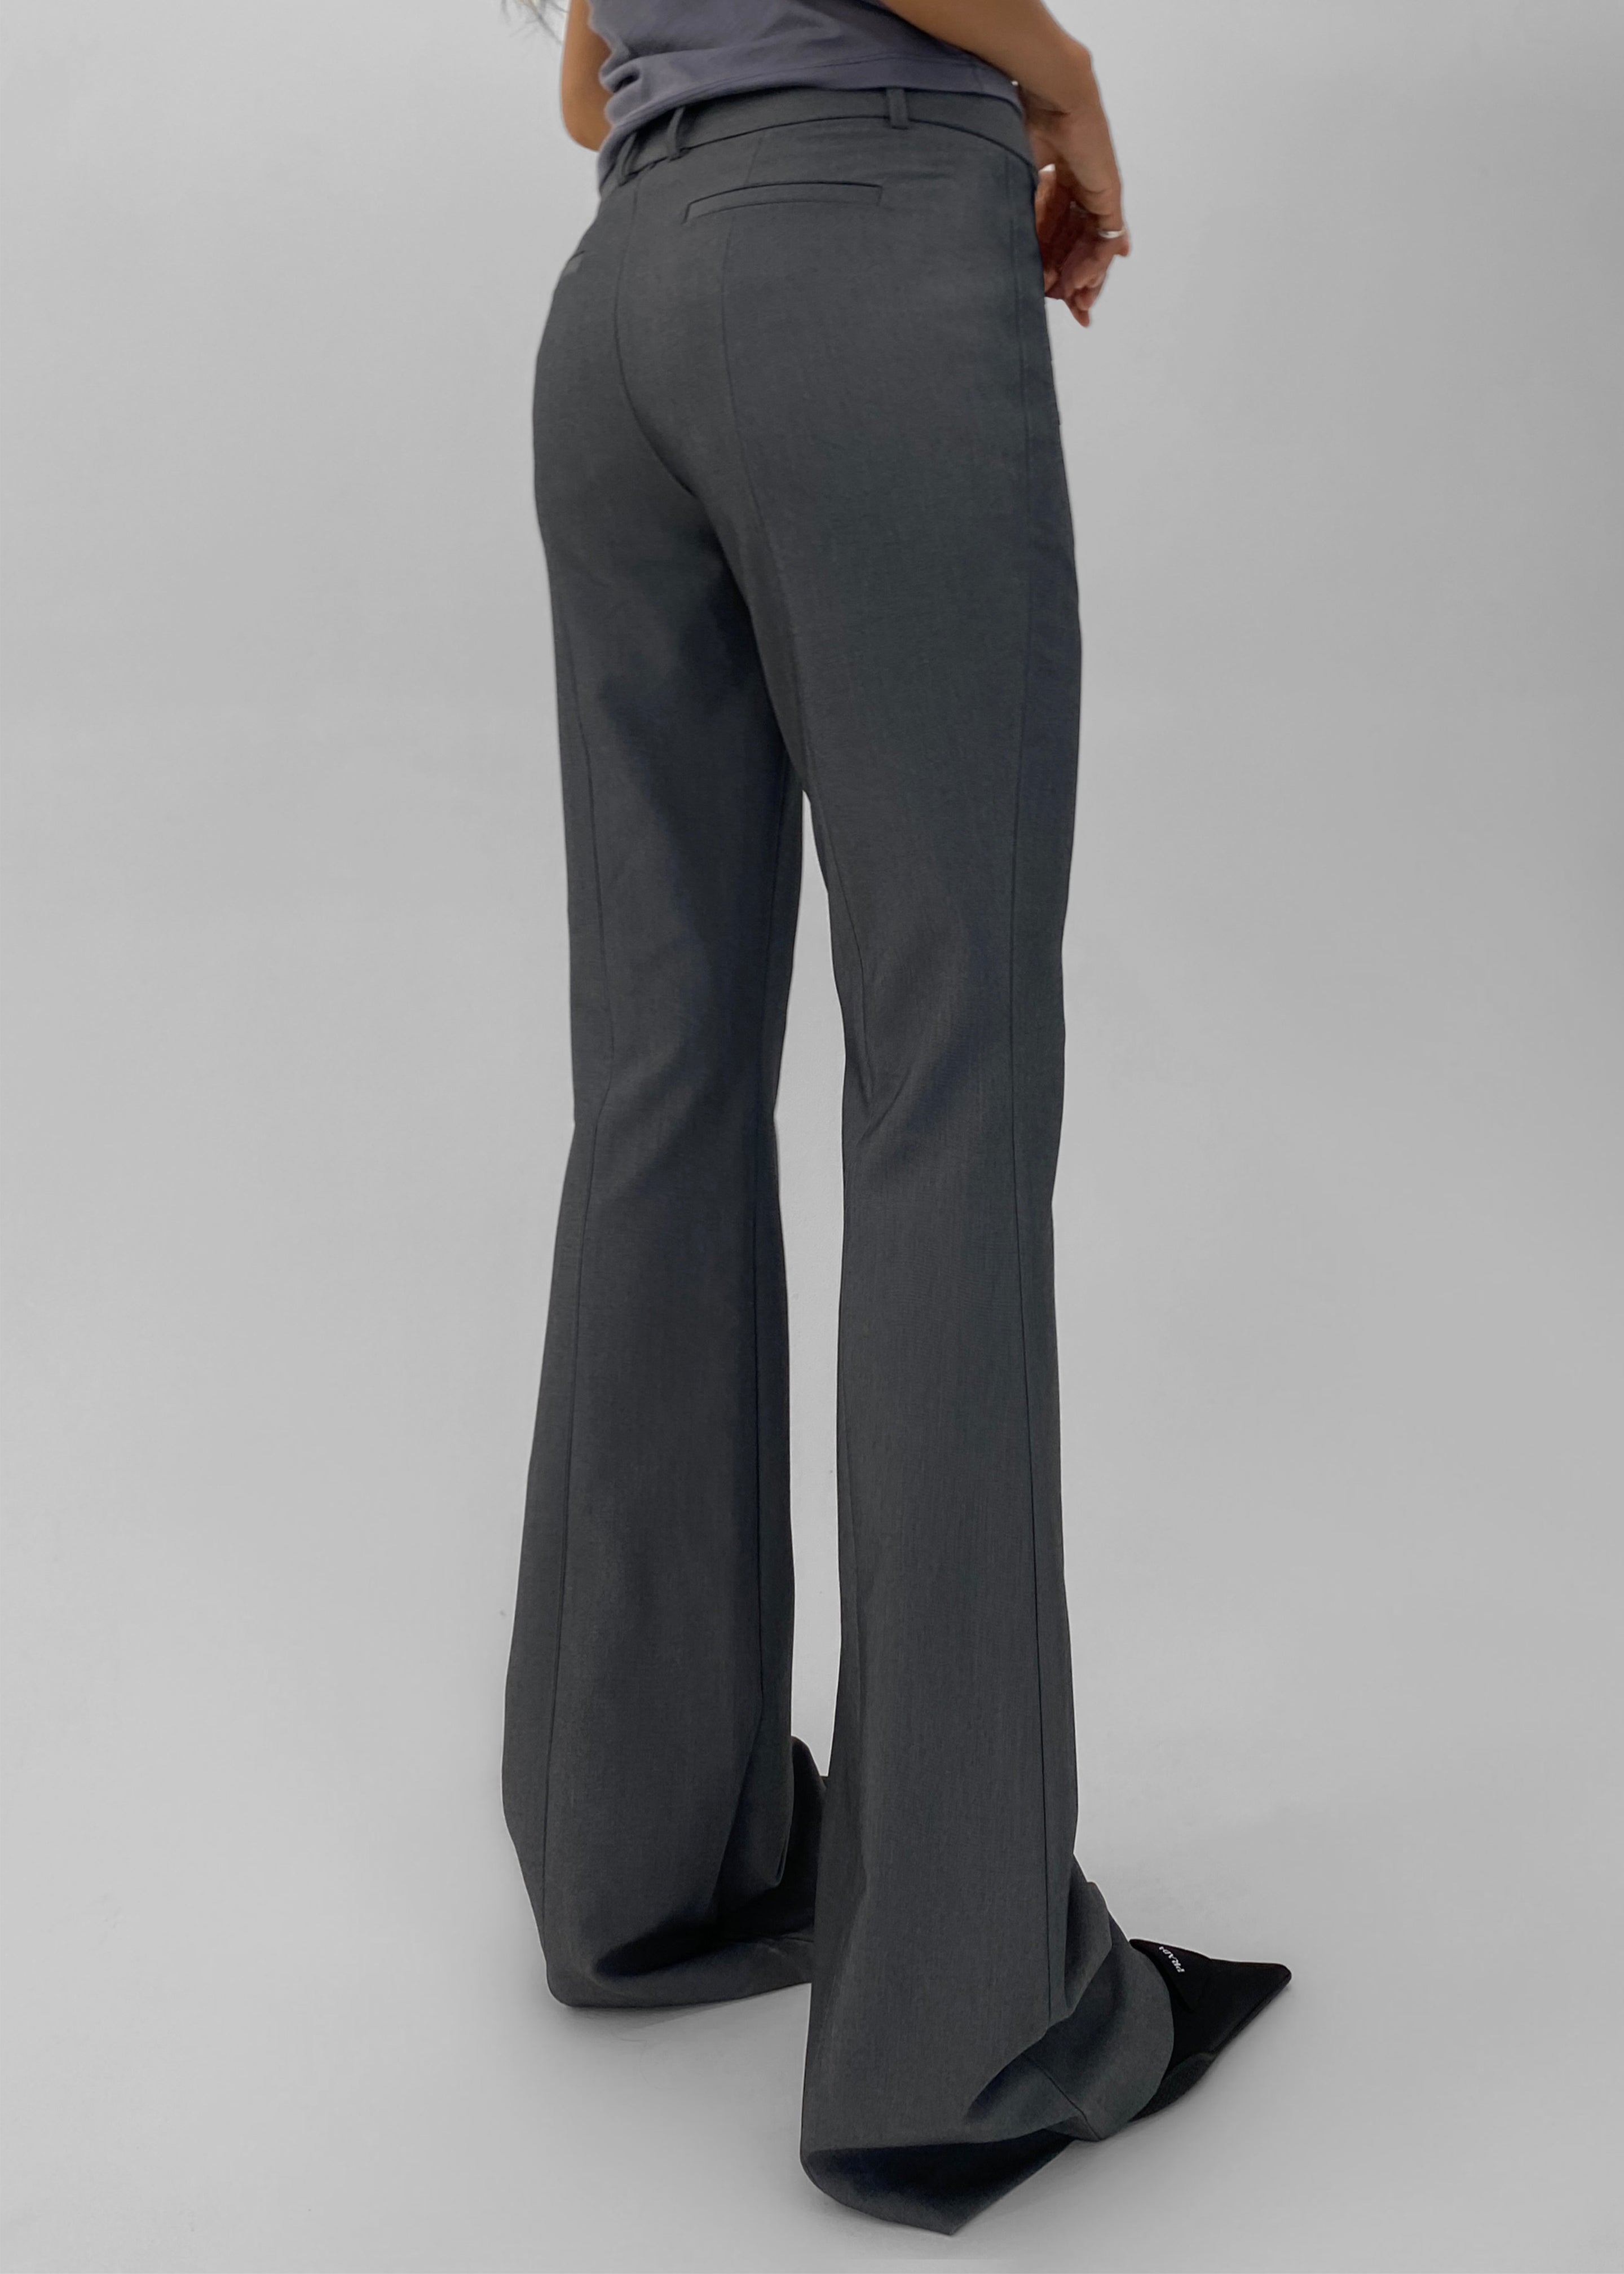 Charley Bootcut Pants - Charcoal – The Frankie Shop